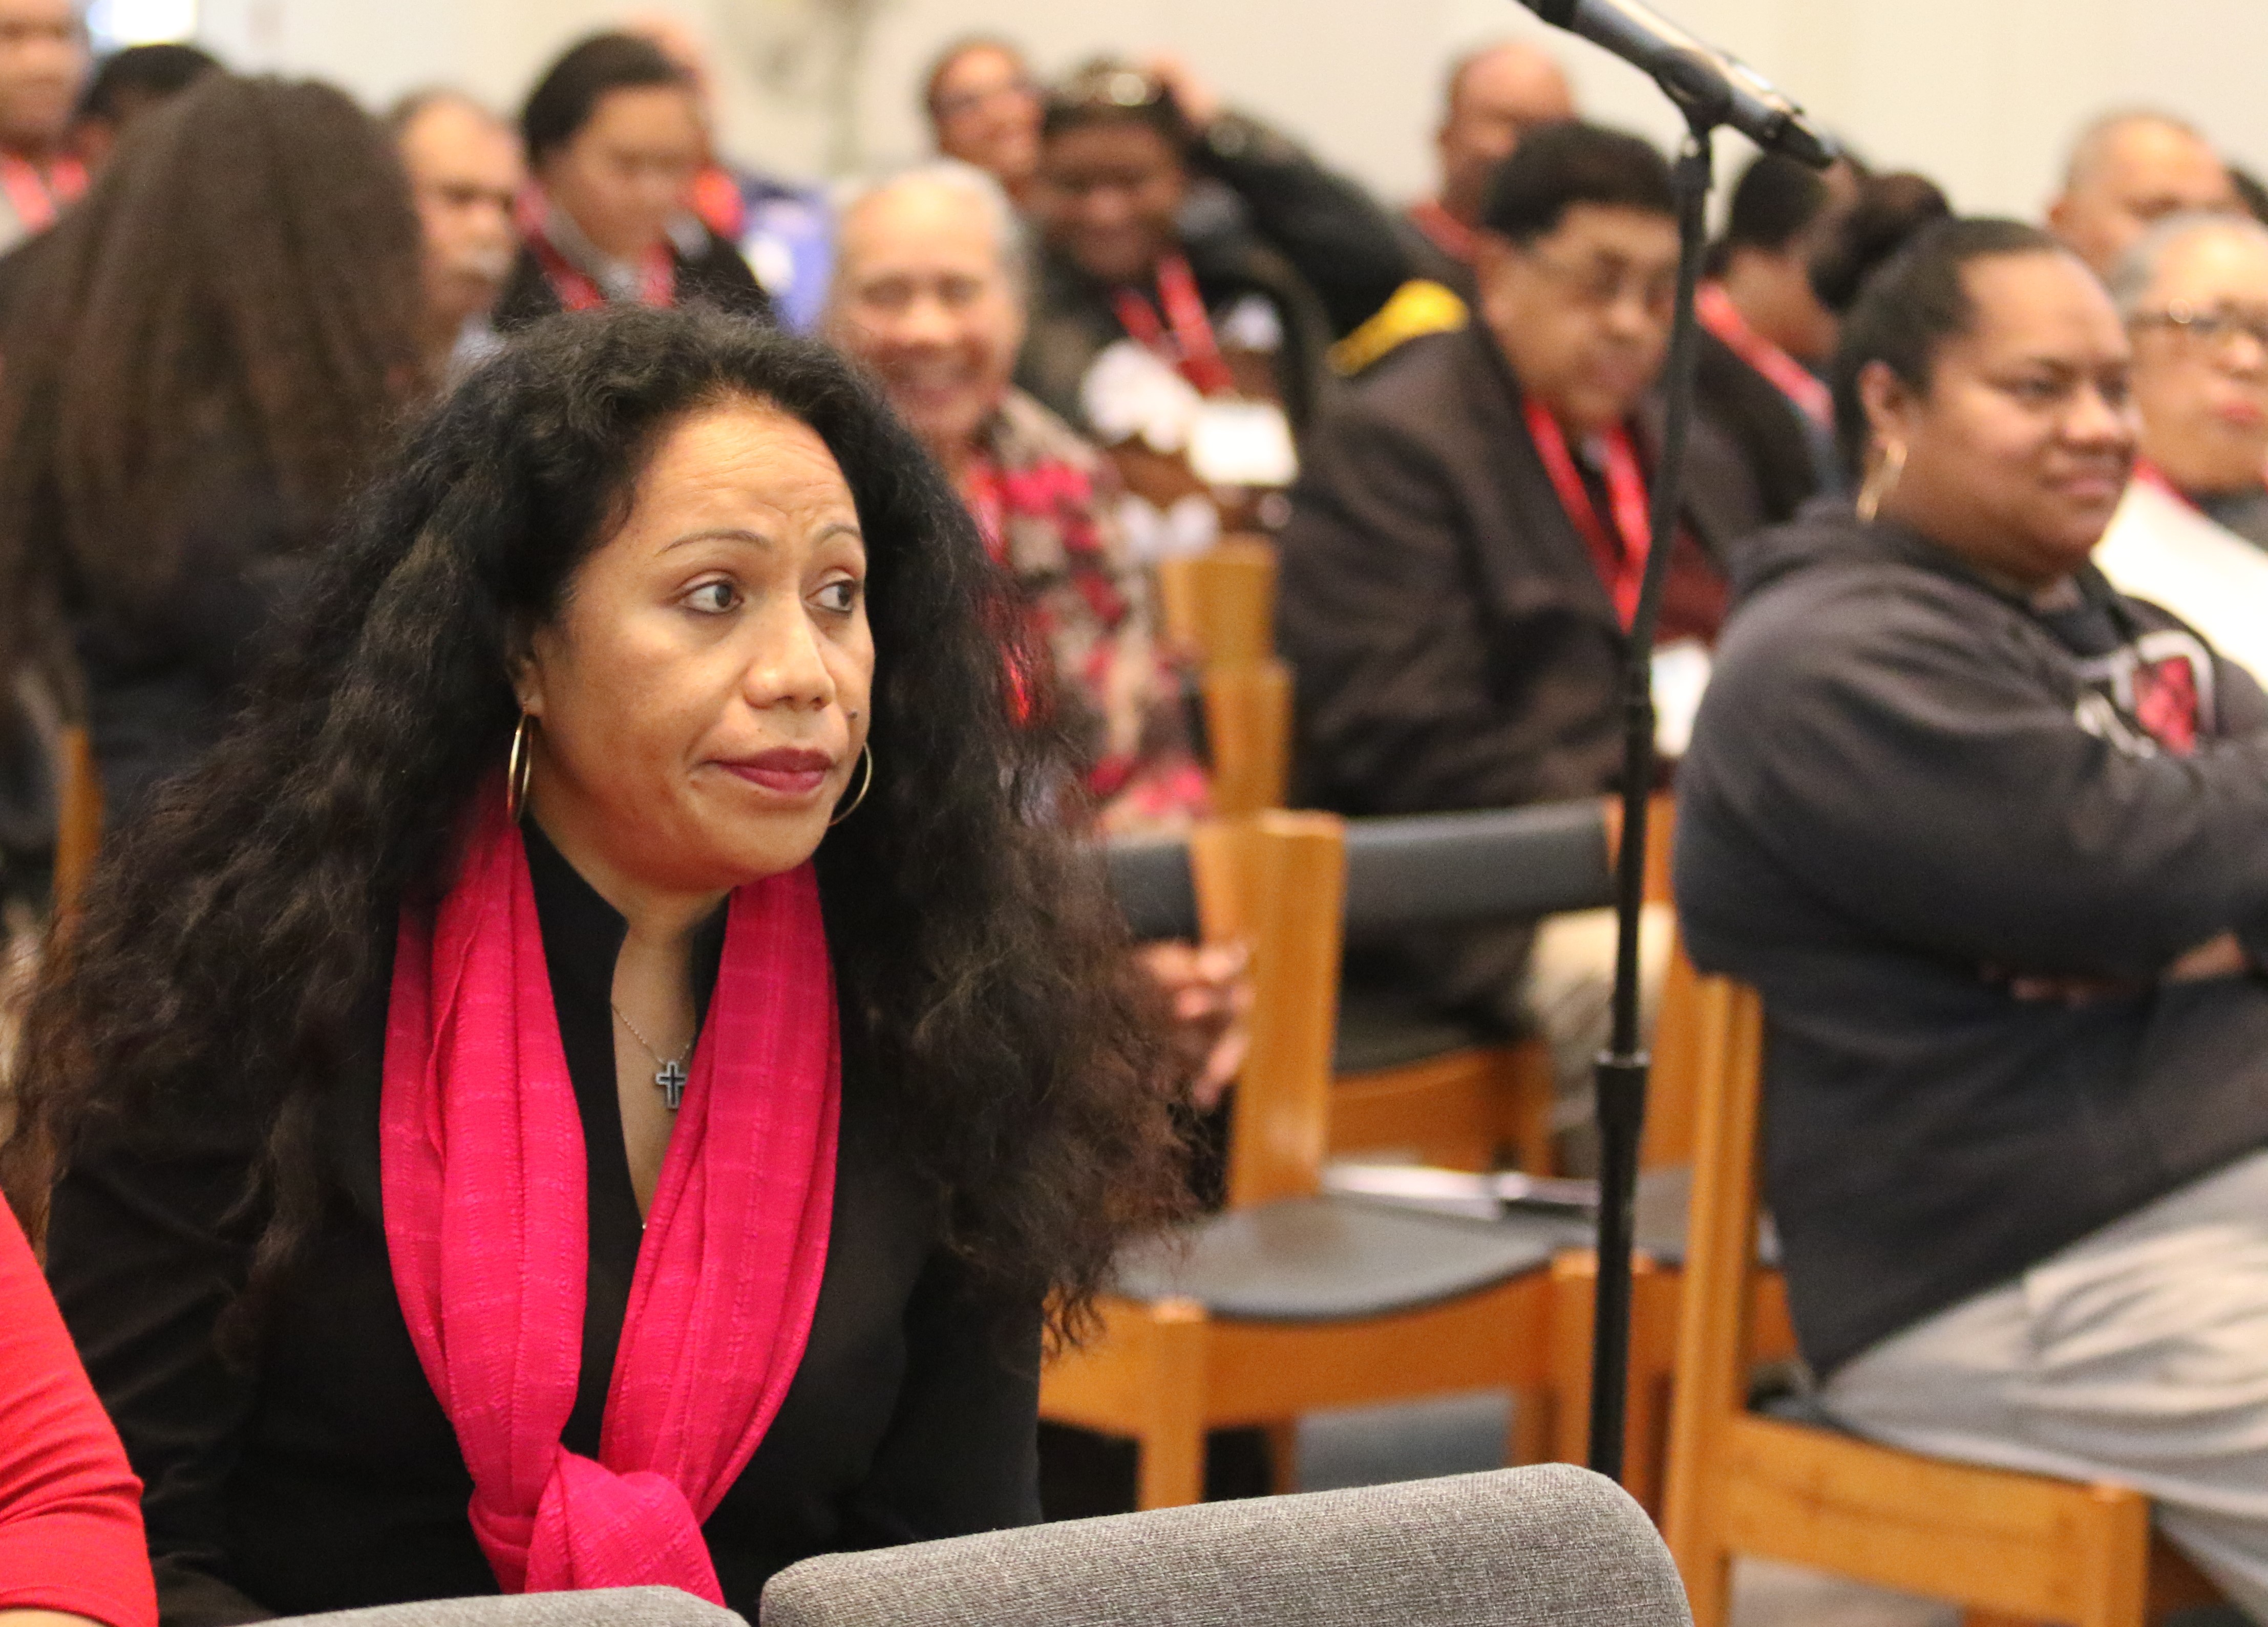 Mele Maka, a member of Moorpark United Methodist Church and a lay delegate of the Cal-Pac Conference to the General Conference pays attention to a presentation at the Pacific Islander Gathering held from December 9-11, 2018 in Claremont Seminary, CA. Photo by Thomas Kim, UMNS.